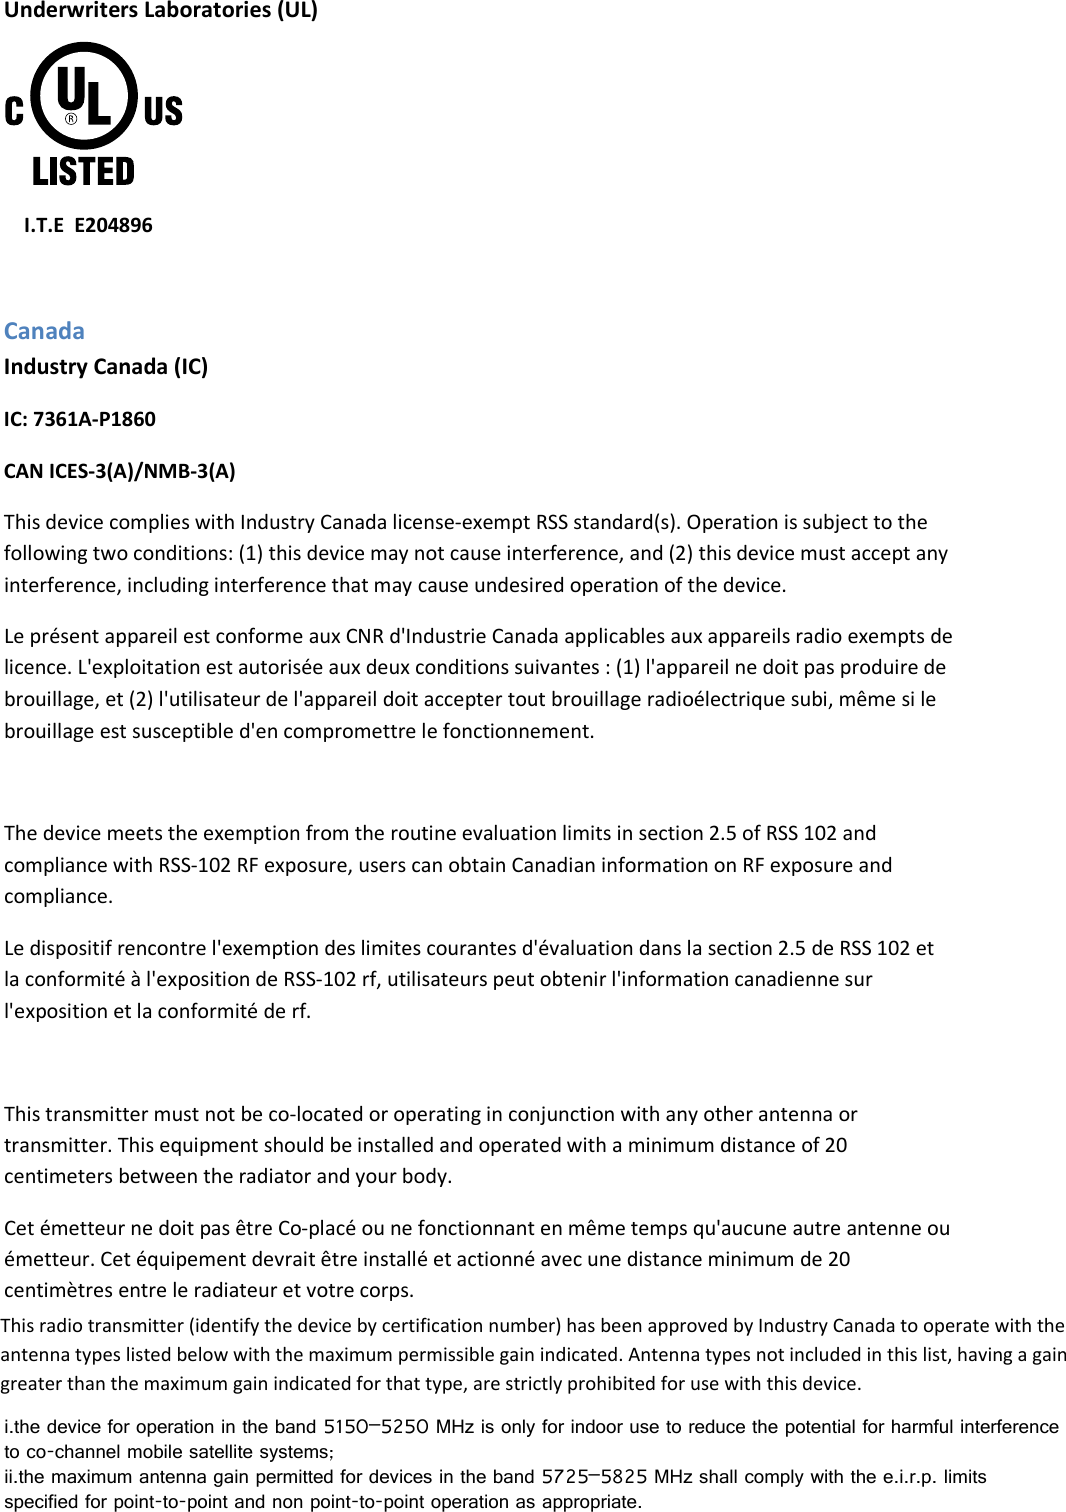 Underwriters Laboratories (UL)  I.T.E  E204896 Canada Industry Canada (IC) IC: 7361A-P1860 CAN ICES-3(A)/NMB-3(A) This device complies with Industry Canada license-exempt RSS standard(s). Operation is subject to the following two conditions: (1) this device may not cause interference, and (2) this device must accept any interference, including interference that may cause undesired operation of the device.  Le présent appareil est conforme aux CNR d&apos;Industrie Canada applicables aux appareils radio exempts de licence. L&apos;exploitation est autorisée aux deux conditions suivantes : (1) l&apos;appareil ne doit pas produire de brouillage, et (2) l&apos;utilisateur de l&apos;appareil doit accepter tout brouillage radioélectrique subi, même si le brouillage est susceptible d&apos;en compromettre le fonctionnement.  The device meets the exemption from the routine evaluation limits in section 2.5 of RSS 102 and compliance with RSS-102 RF exposure, users can obtain Canadian information on RF exposure and compliance.  Le dispositif rencontre l&apos;exemption des limites courantes d&apos;évaluation dans la section 2.5 de RSS 102 et la conformité à l&apos;exposition de RSS-102 rf, utilisateurs peut obtenir l&apos;information canadienne sur l&apos;exposition et la conformité de rf.  This transmitter must not be co-located or operating in conjunction with any other antenna or transmitter. This equipment should be installed and operated with a minimum distance of 20 centimeters between the radiator and your body.  Cet émetteur ne doit pas être Co-placé ou ne fonctionnant en même temps qu&apos;aucune autre antenne ou émetteur. Cet équipement devrait être installé et actionné avec une distance minimum de 20 centimètres entre le radiateur et votre corps. i.the device for operation in the band 5150–5250 MHz is only for indoor use to reduce the potential for harmful interference to co-channel mobile satellite systems;ii.the maximum antenna gain permitted for devices in the band 5725–5825 MHz shall comply with the e.i.r.p. limits specified for point-to-point and non point-to-point operation as appropriate.This radio transmitter (identify the device by certification number) has been approved by Industry Canada to operate with the antenna types listed below with the maximum permissible gain indicated. Antenna types not included in this list, having a gain greater than the maximum gain indicated for that type, are strictly prohibited for use with this device.